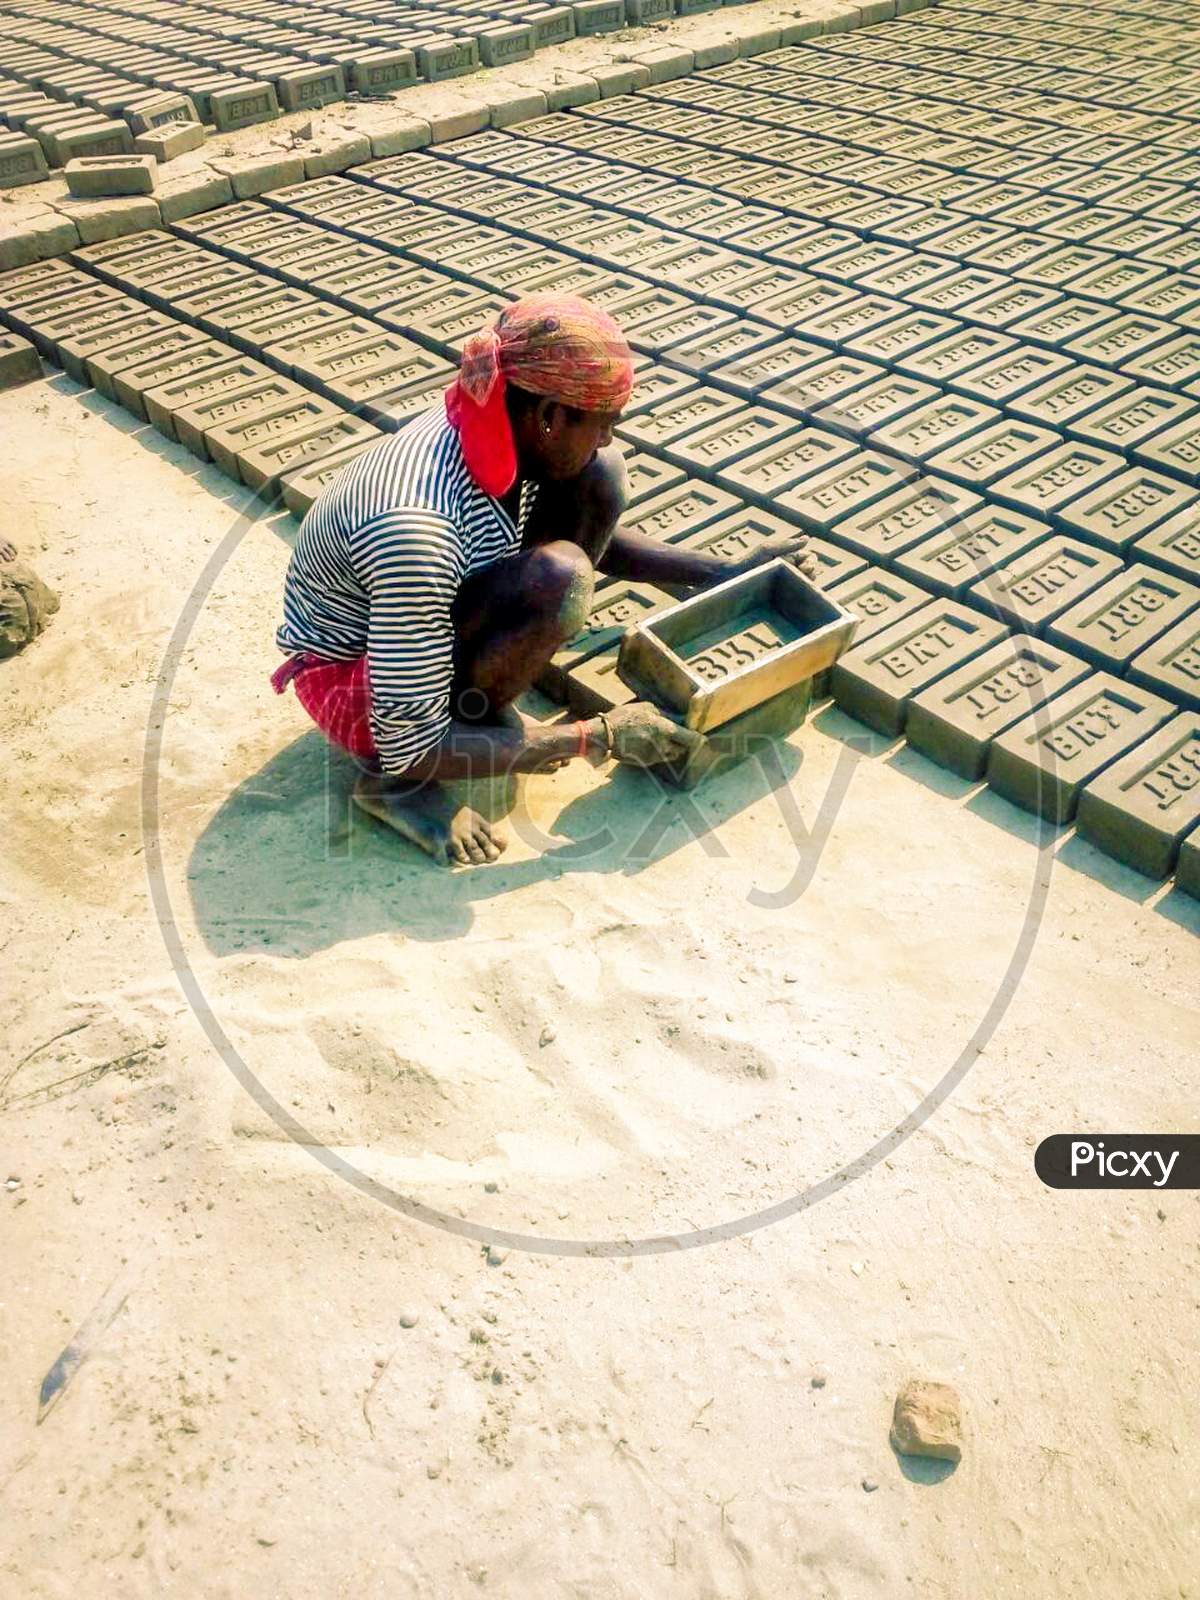 A worker is making bricks. How many people like him have been making hundreds of bricks by labour. How many big buildings are being built with these bricks.